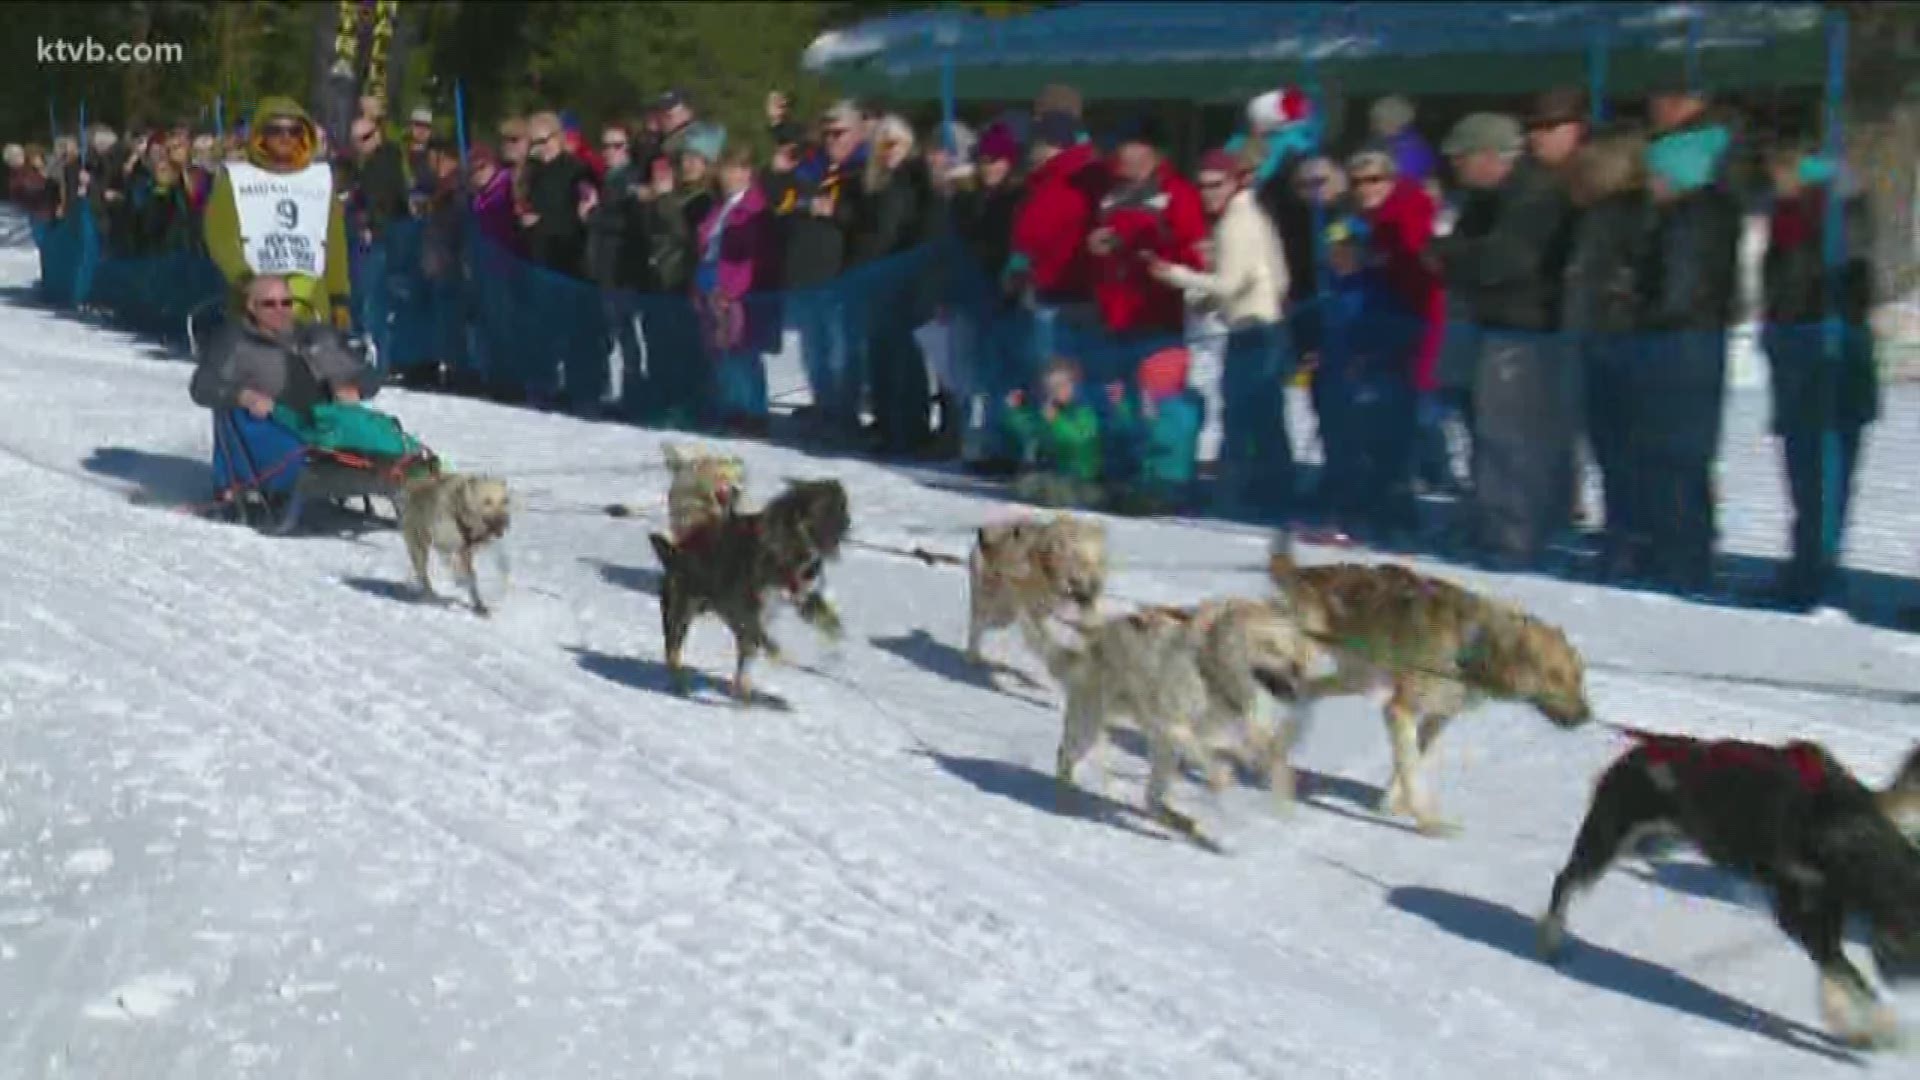 Mushers got off to a good start Wednesday in a race that goes for 300 miles.